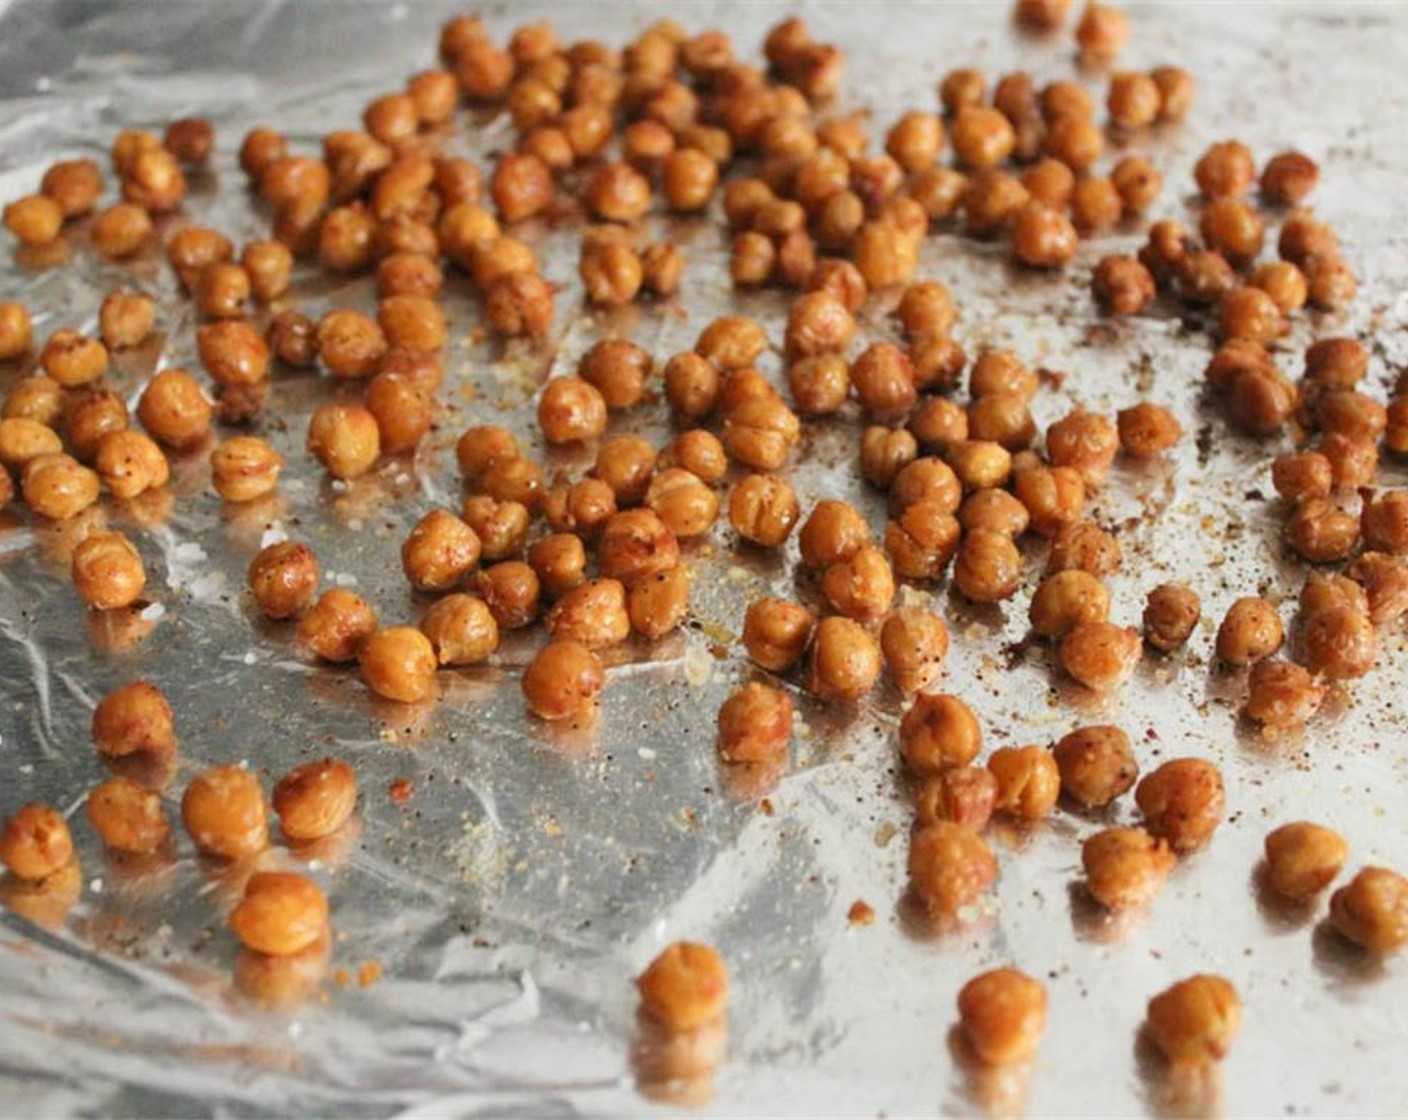 step 4 Transfer the baking sheet to the oven and bake for 30-40 minutes until golden and crispy. Stir after about 15 minutes. The cooking time will vary depending on the size of your chickpeas. Make sure to check on them after 30 minutes.